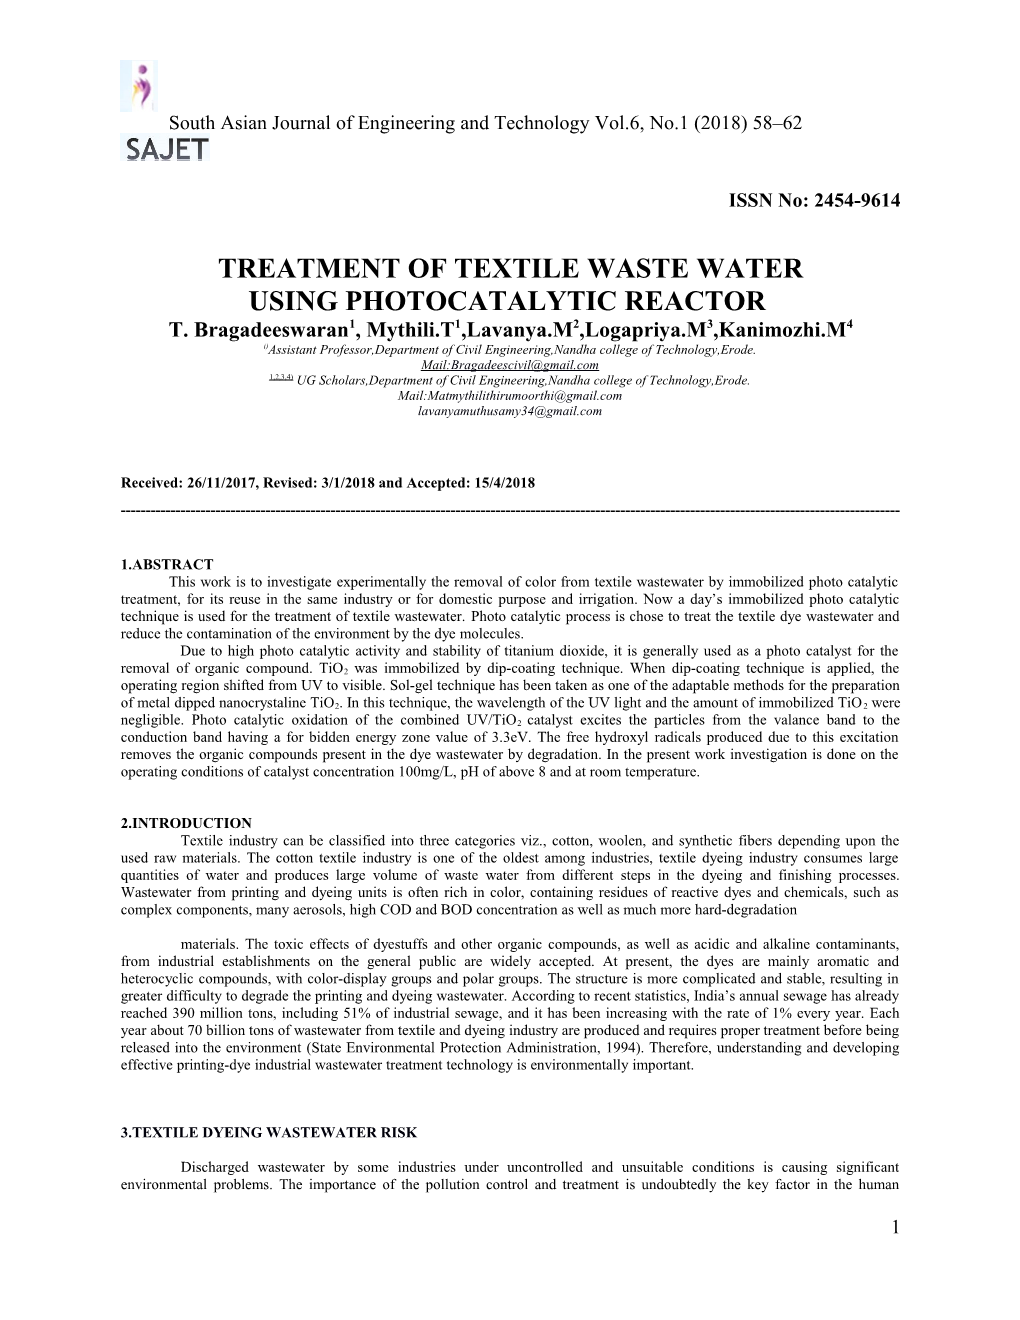 Treatment of Textile Waste Water